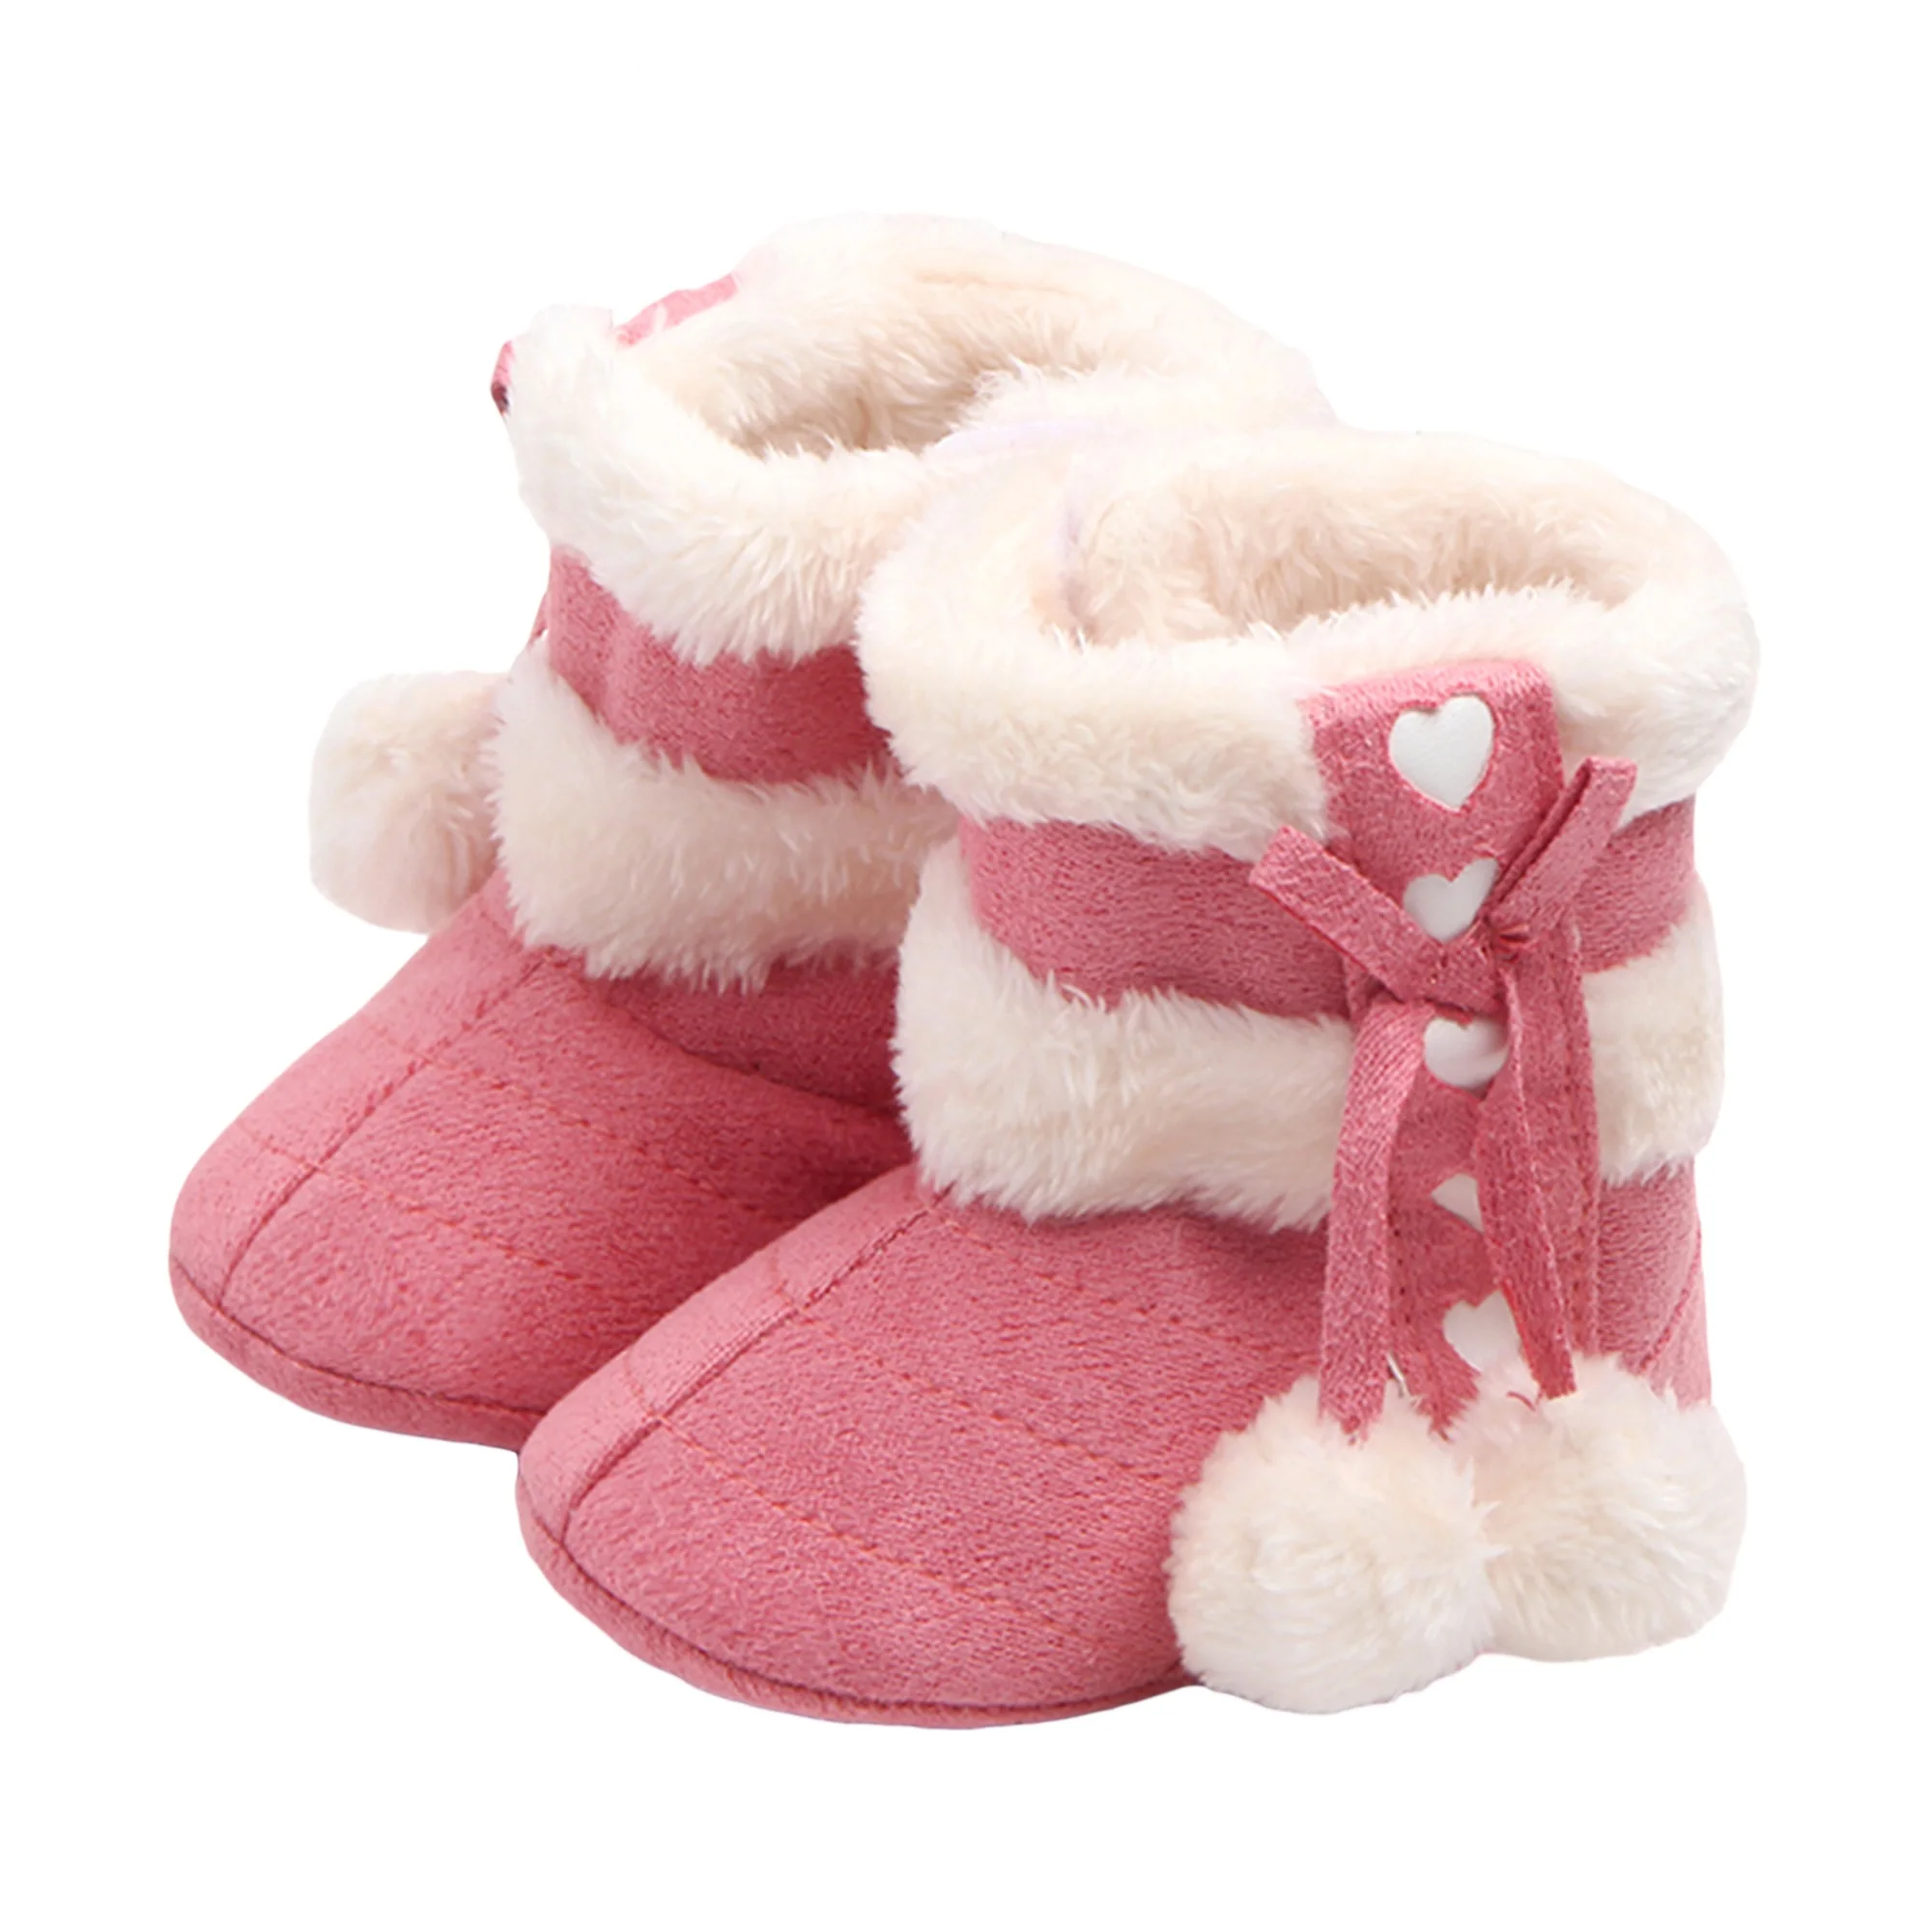 

Cute Faux Fur Winter Boots with Bow Detail for Infant Girls - Warm and Cozy Snow Shoes for Newborns and Toddlers